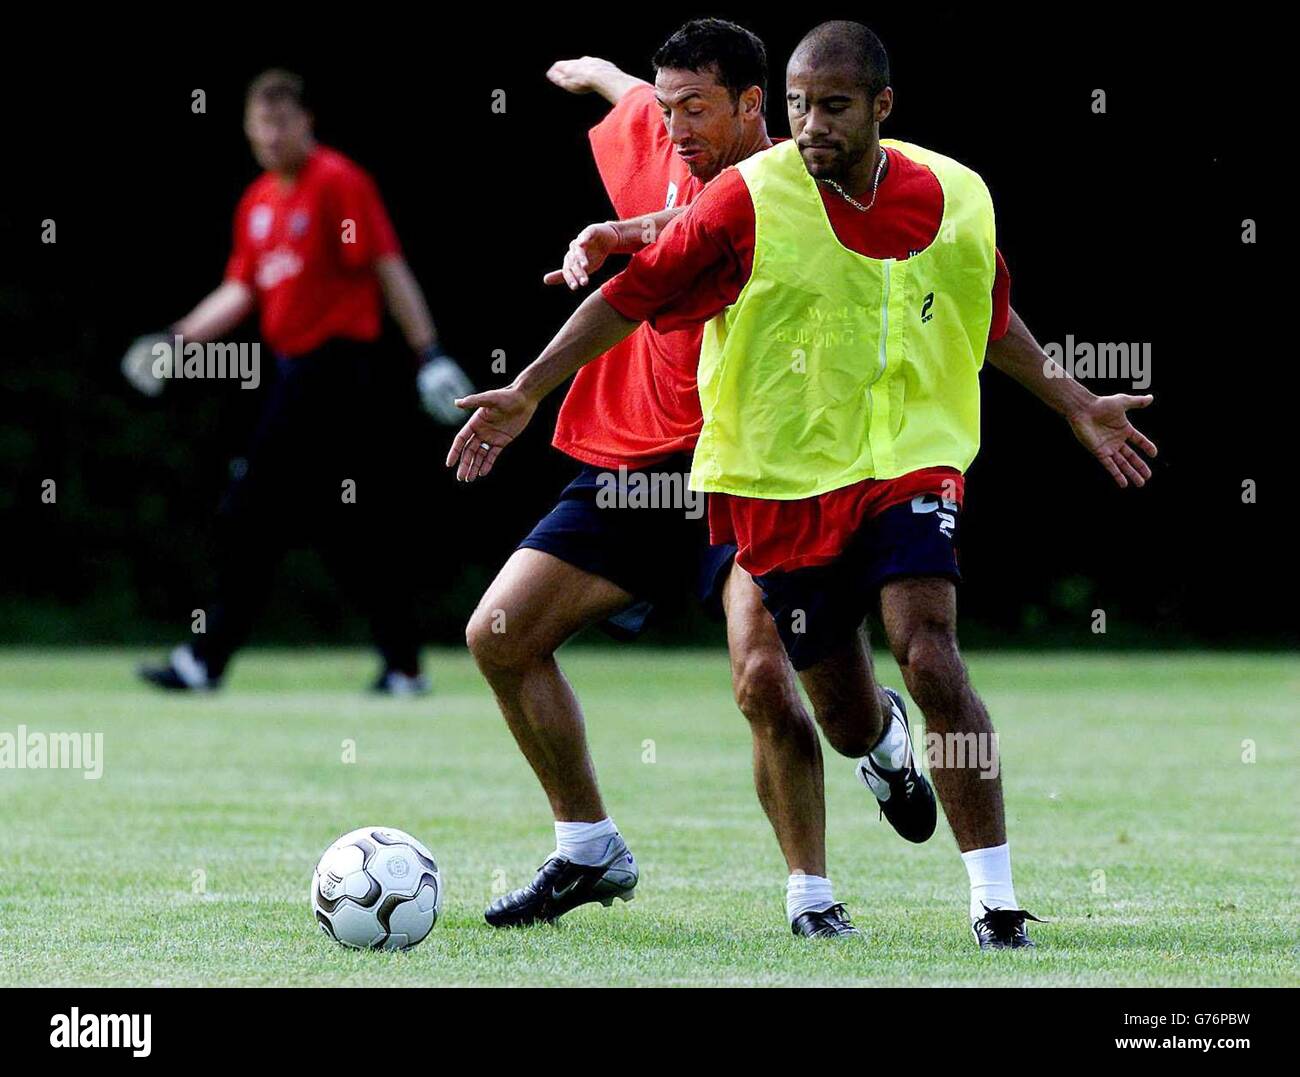 West Bromwich Albion captain Derek McInnes (left) hussles for the ball, protected by Adam Chambers (right) during training at Aston University Sports Ground, Birmingham prior to their opening game in the Premiership against Manchester United on Saturday at Old Trafford. Stock Photo